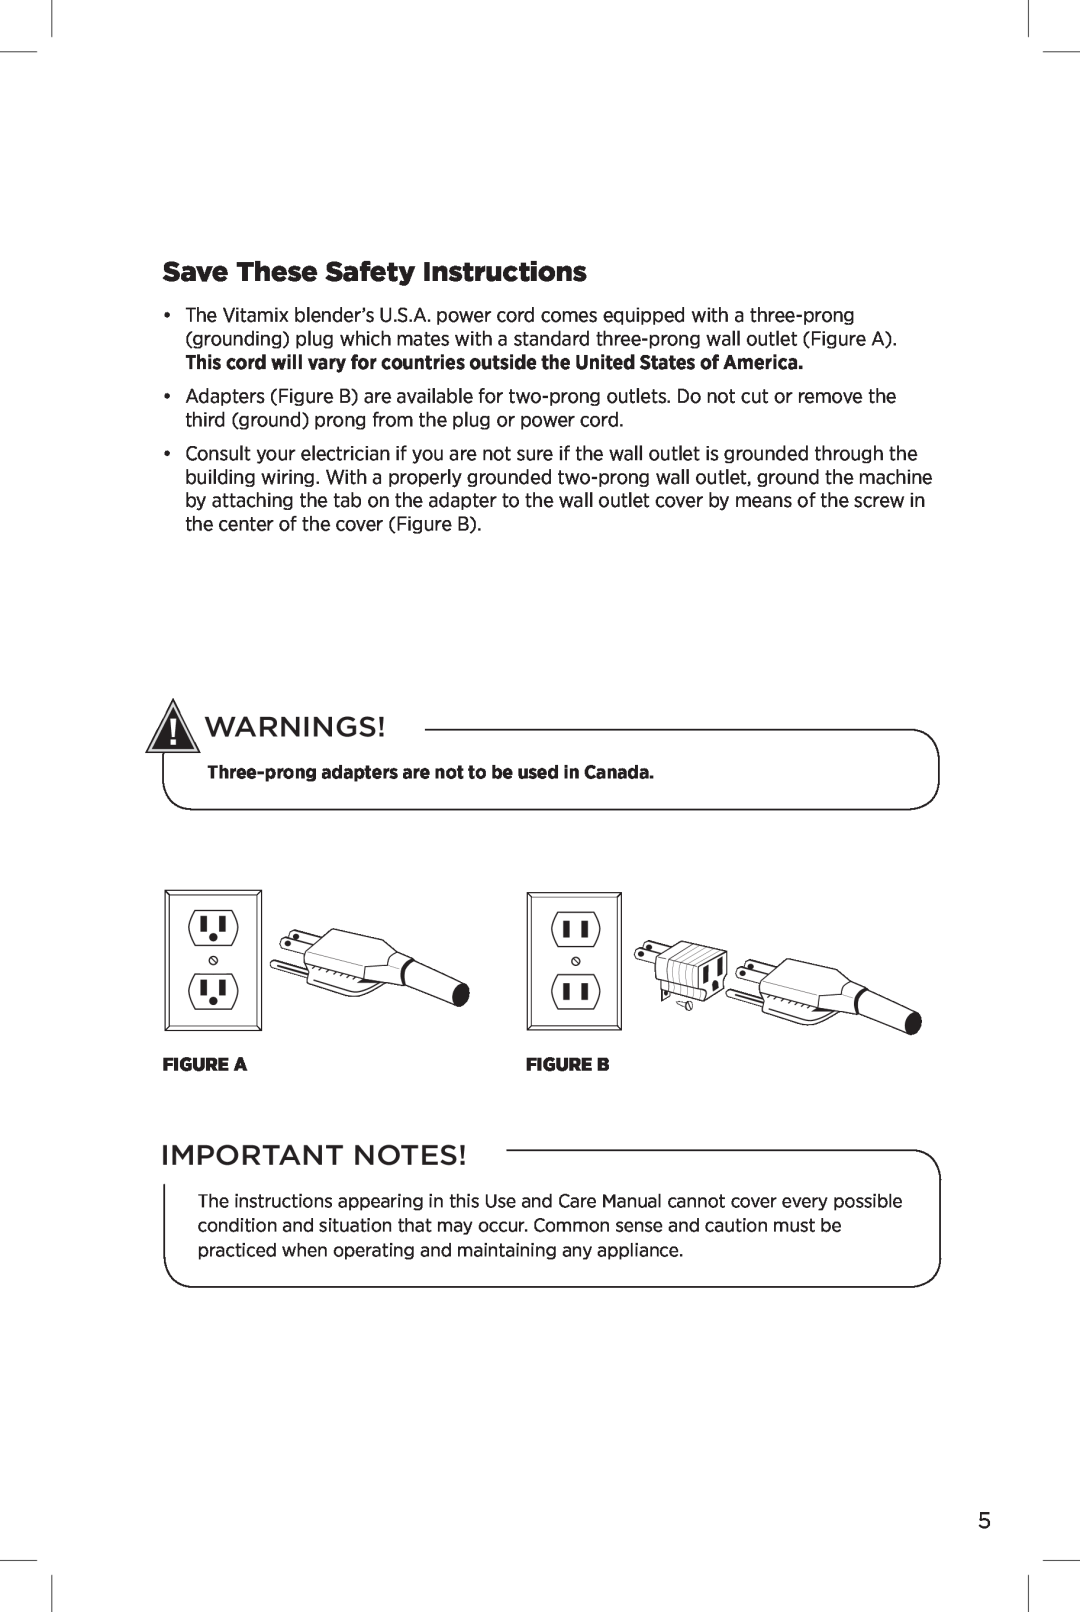 Vita-Mix The Quiet One manual Save These Safety Instructions, Warnings, Important Notes 